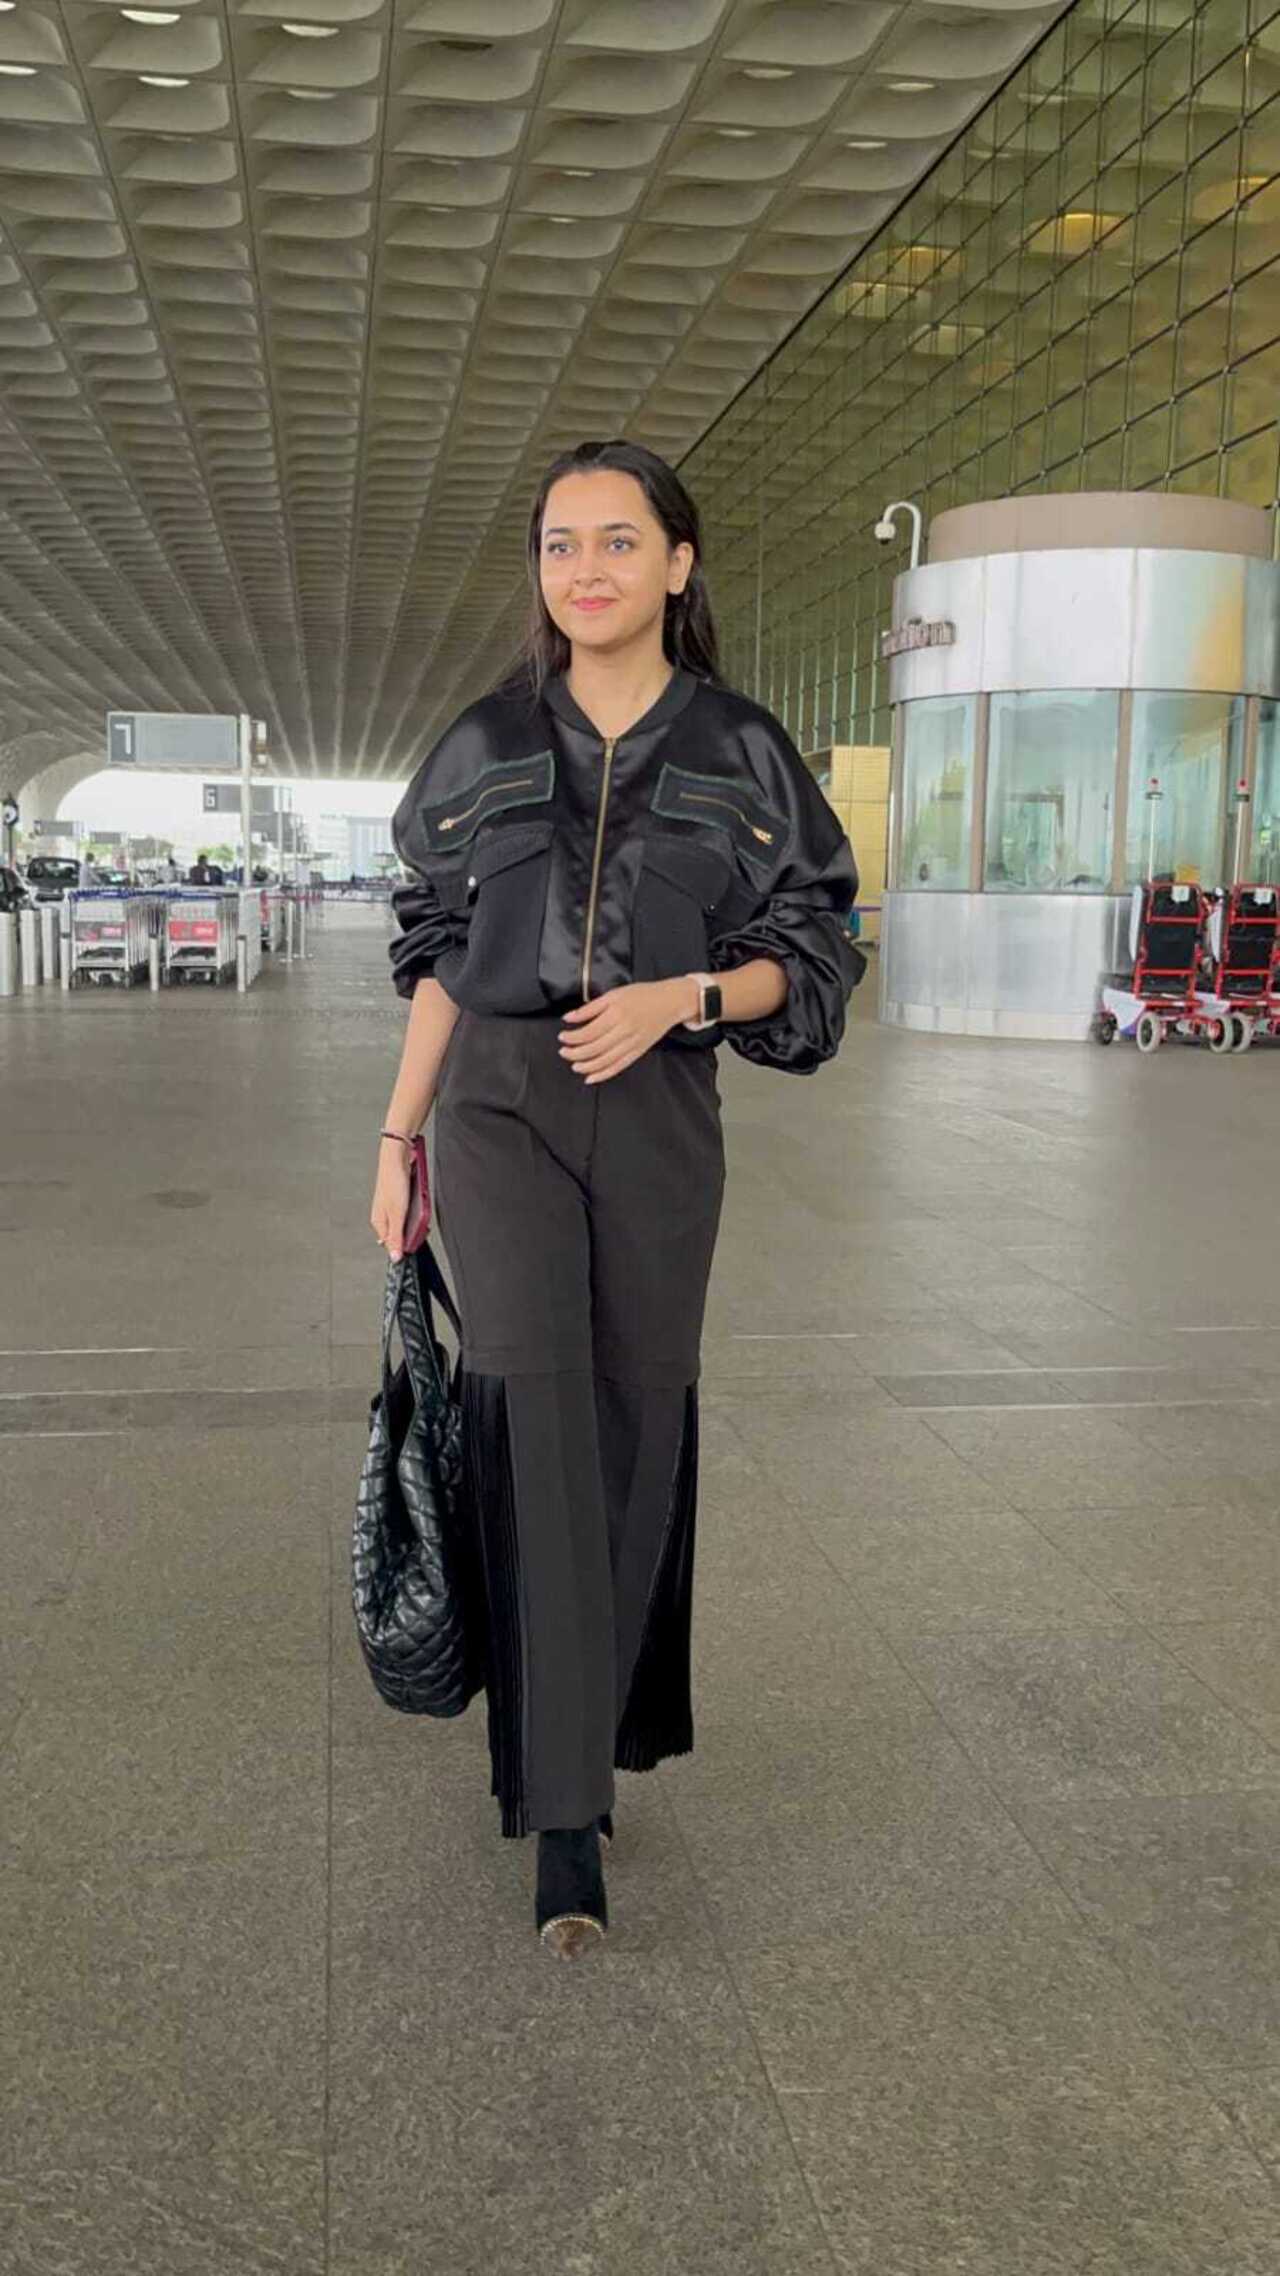 Tejasswi Prakash was spotted at the airport. The actress looked pretty in her no-make-up look